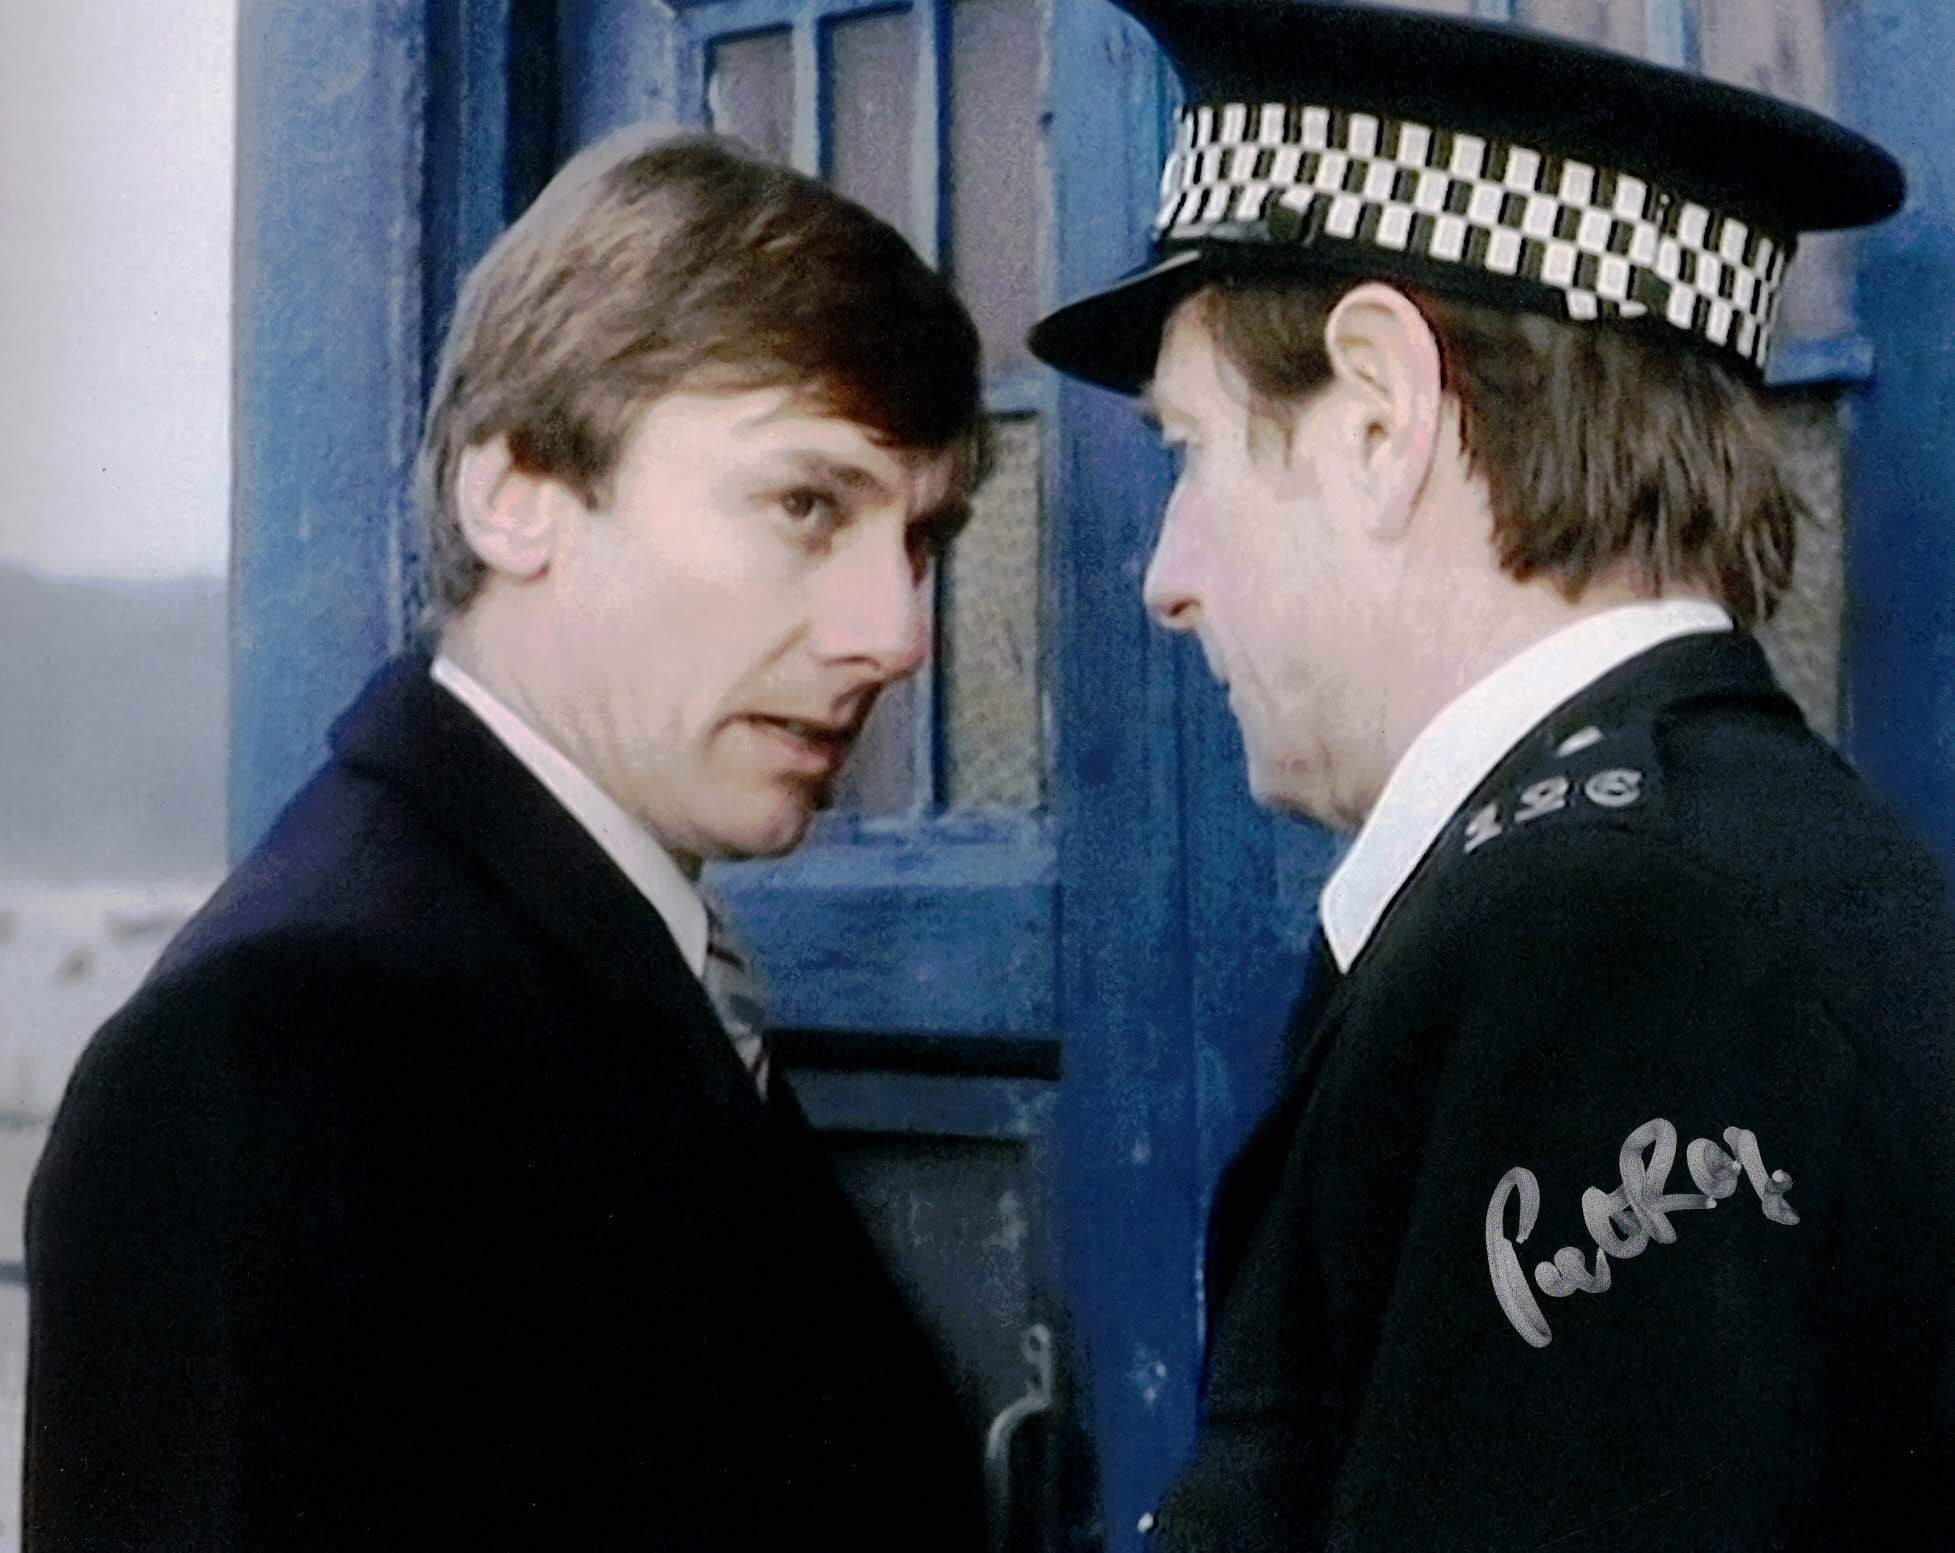 PETER ROY - Policeman - Doctor Who - Logopolis - hand signed 10 x 8 photo